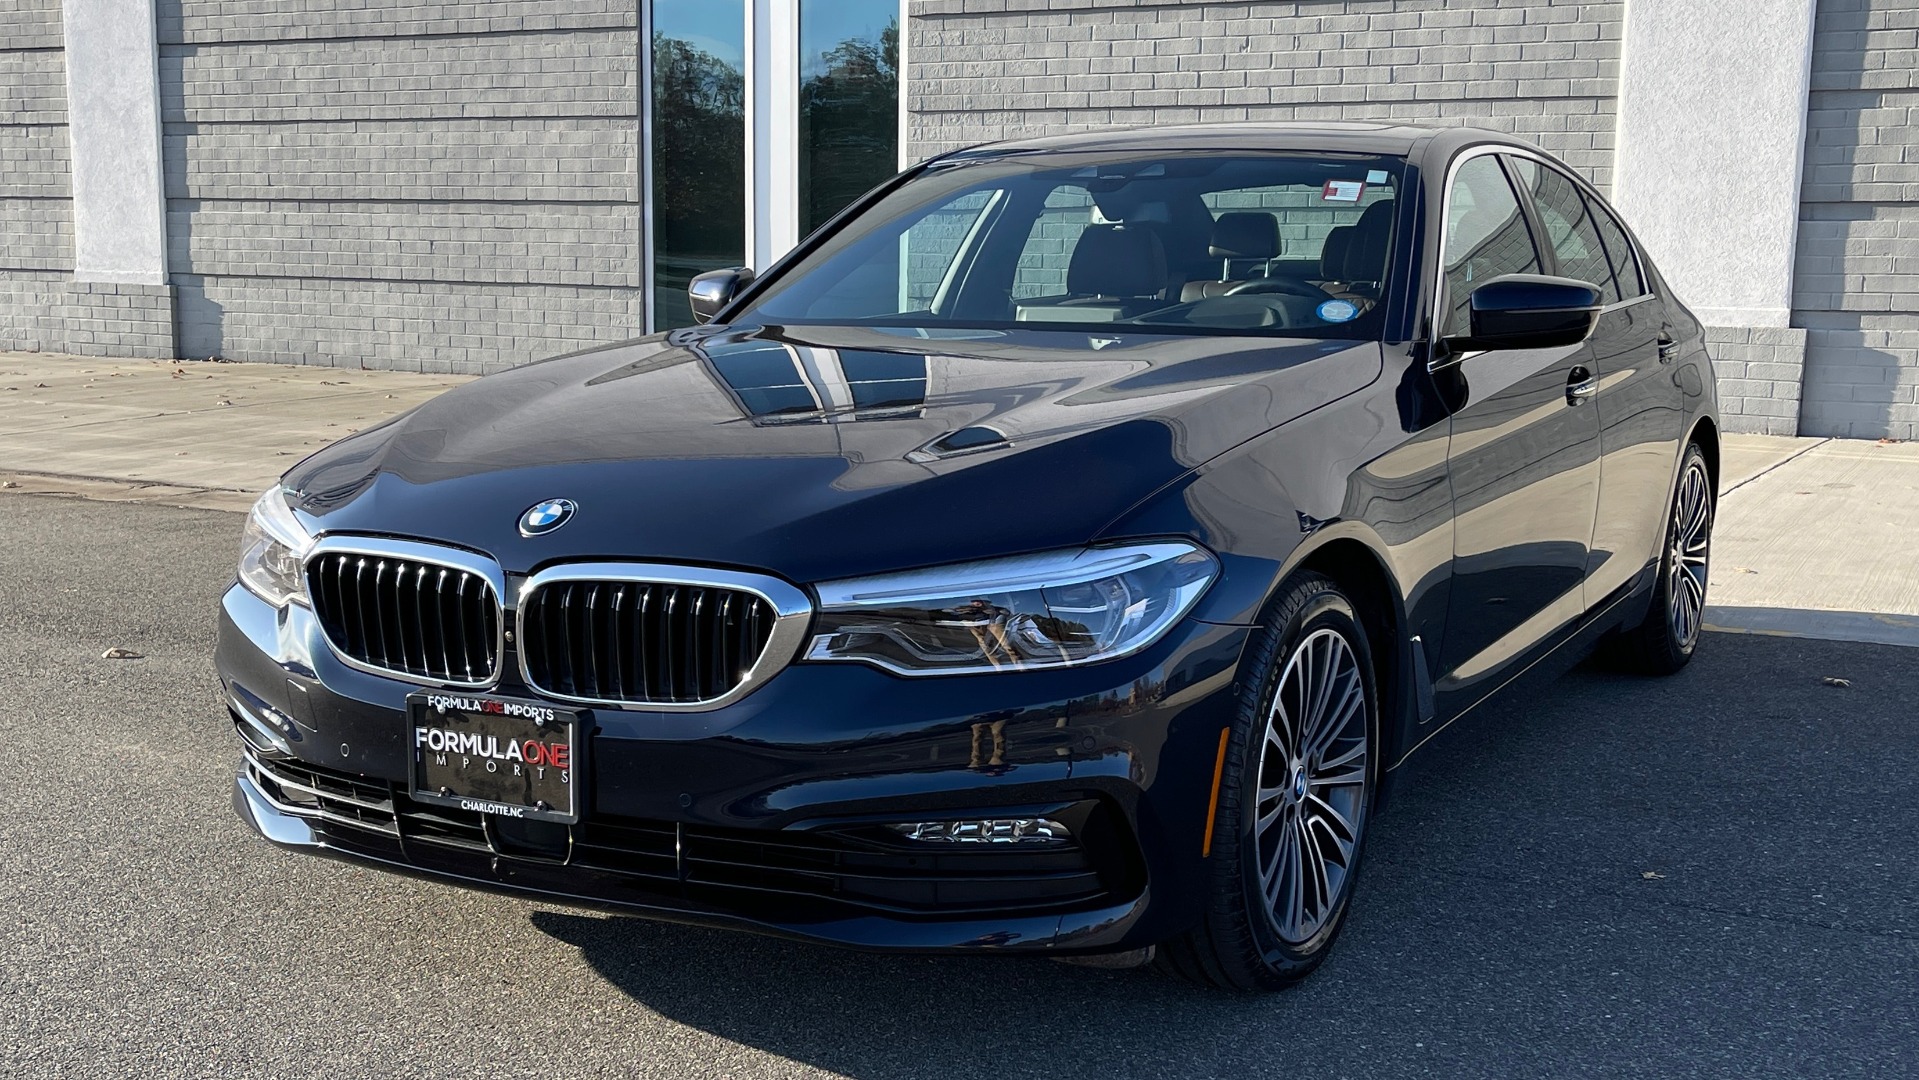 Used 2018 BMW 5 SERIES 530I XDRIVE PREMIUM / EXEC PKG / DRVR ASST PLUS / NAV / REARVIEW for sale Sold at Formula Imports in Charlotte NC 28227 5